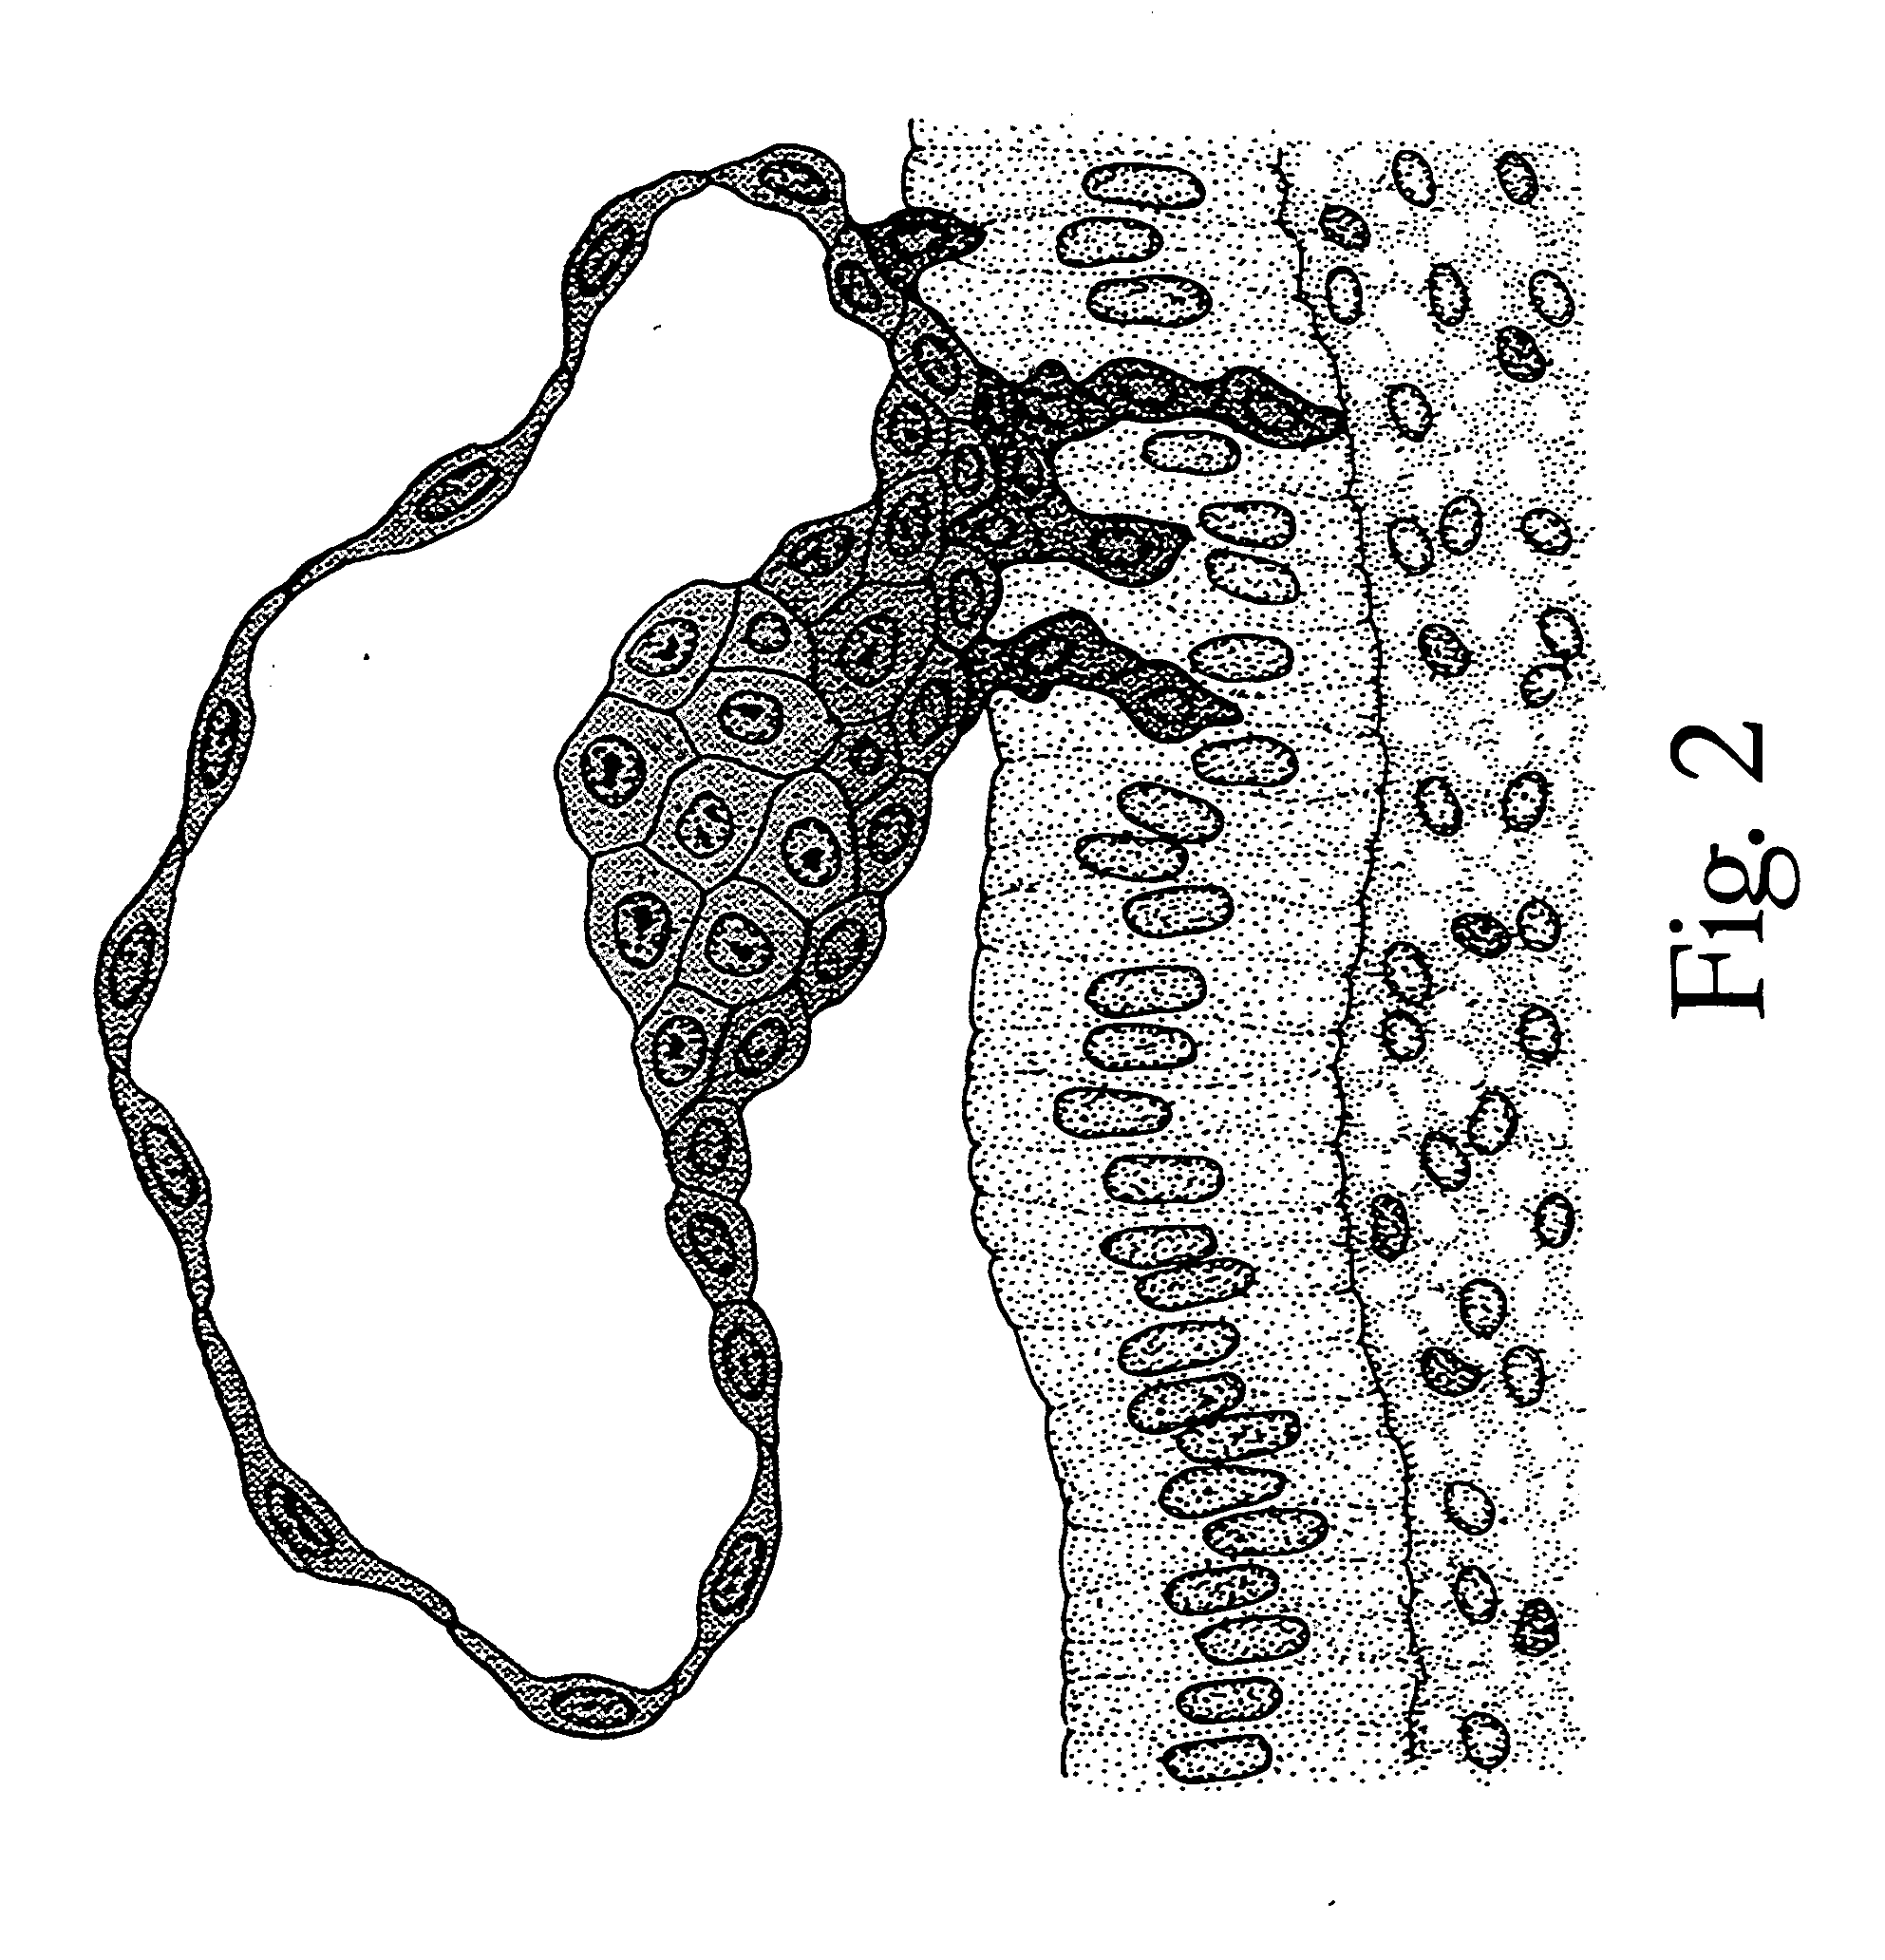 Method of making and using a library of biological information